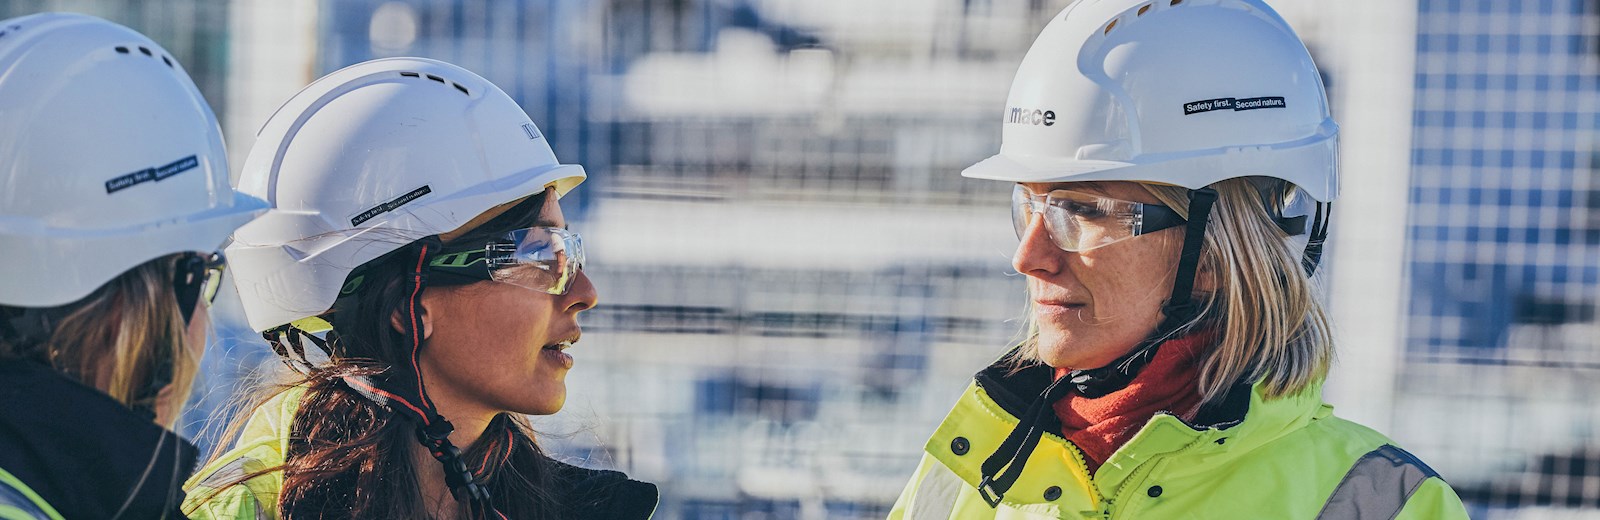 Two women in hivis jackets on a construction site in the daytime 